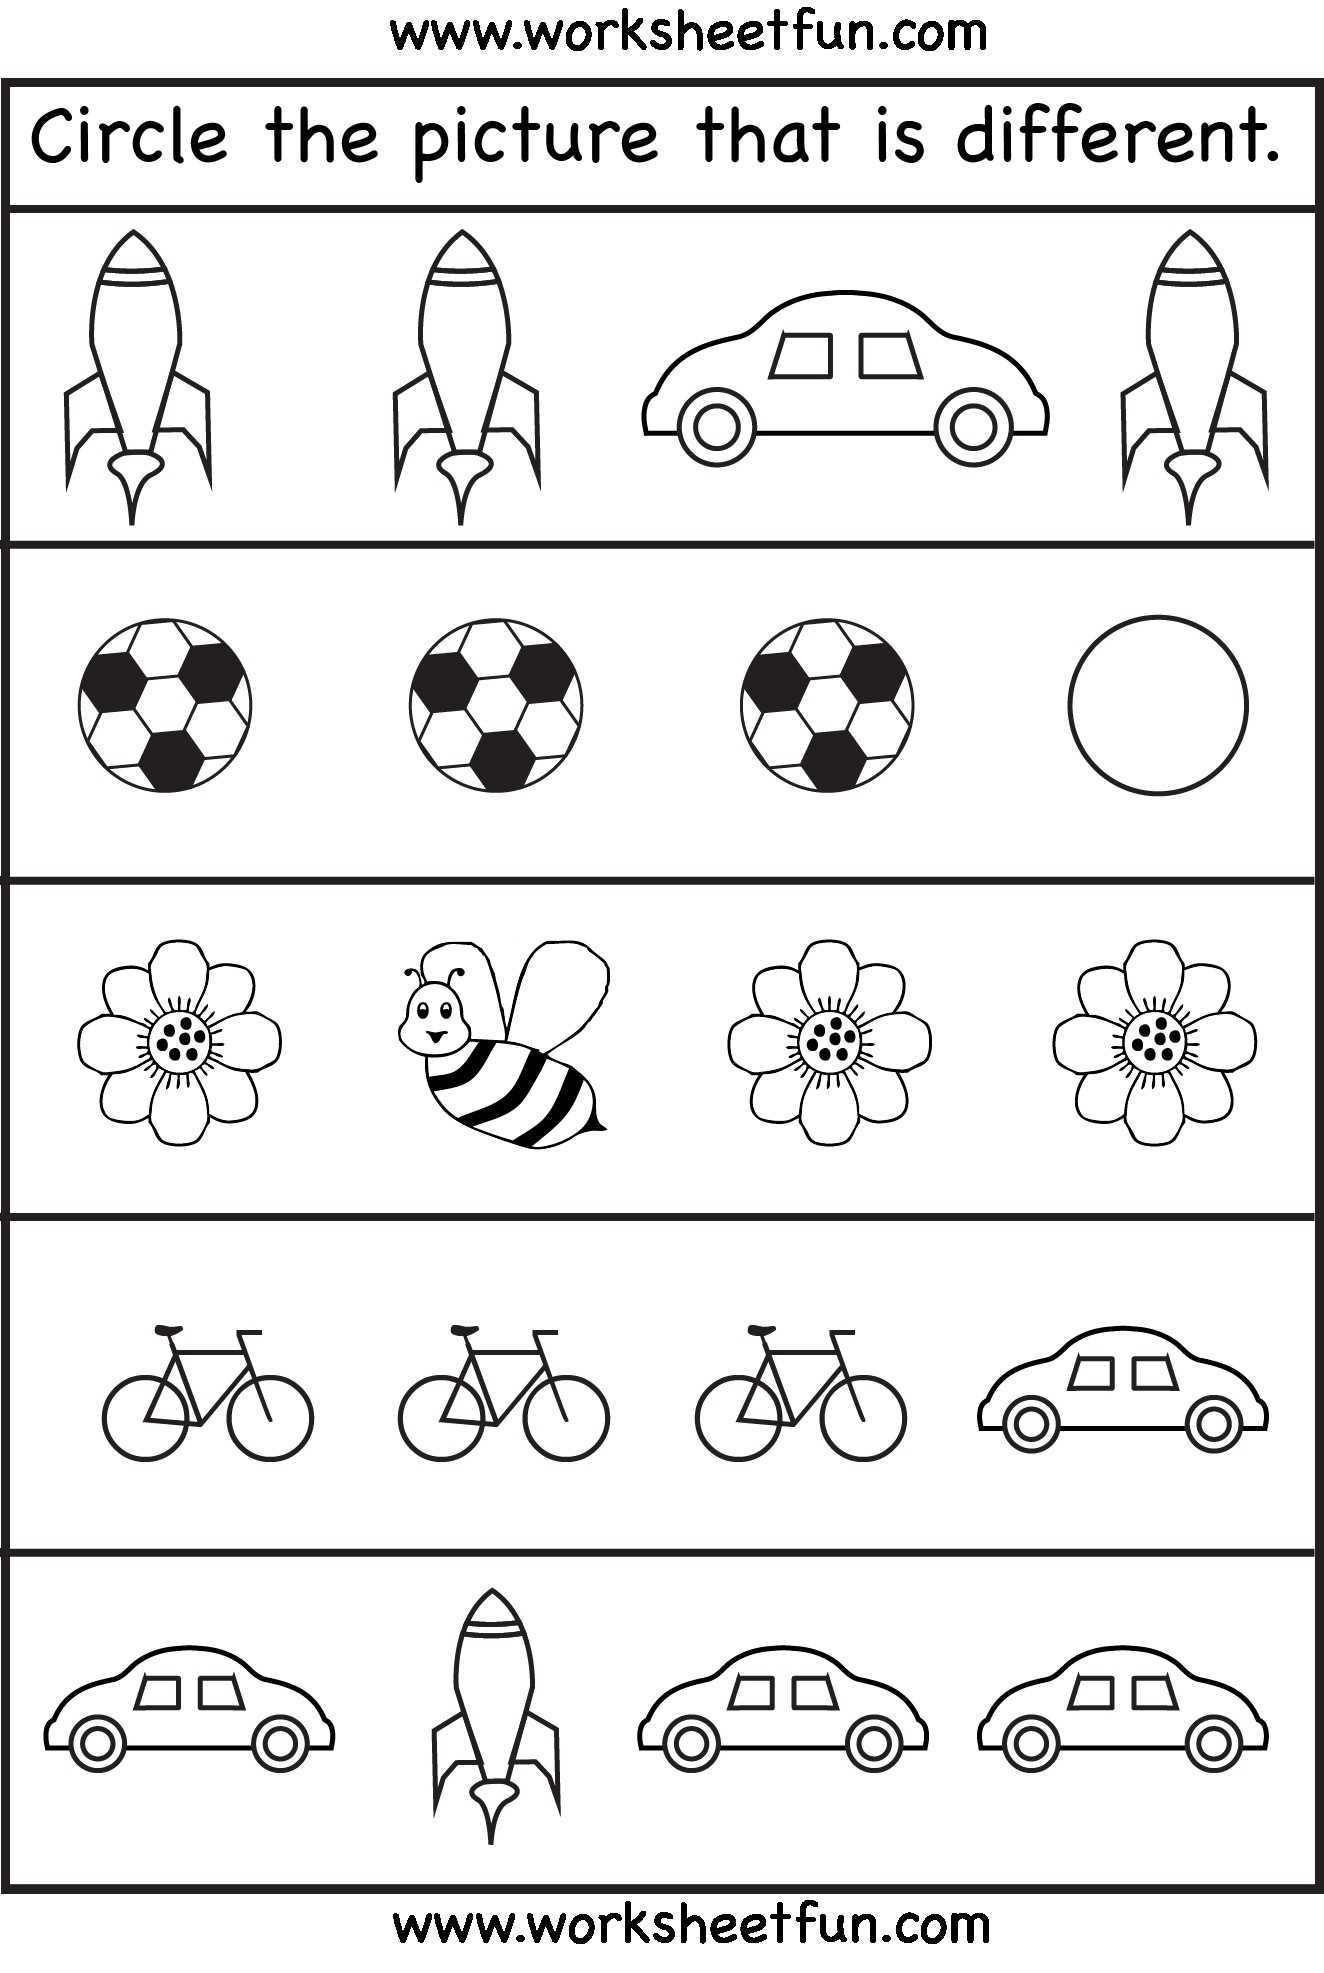 Circles Worksheet Answers and School Bag Worksheet Valid Circle the Picture that is Different 4